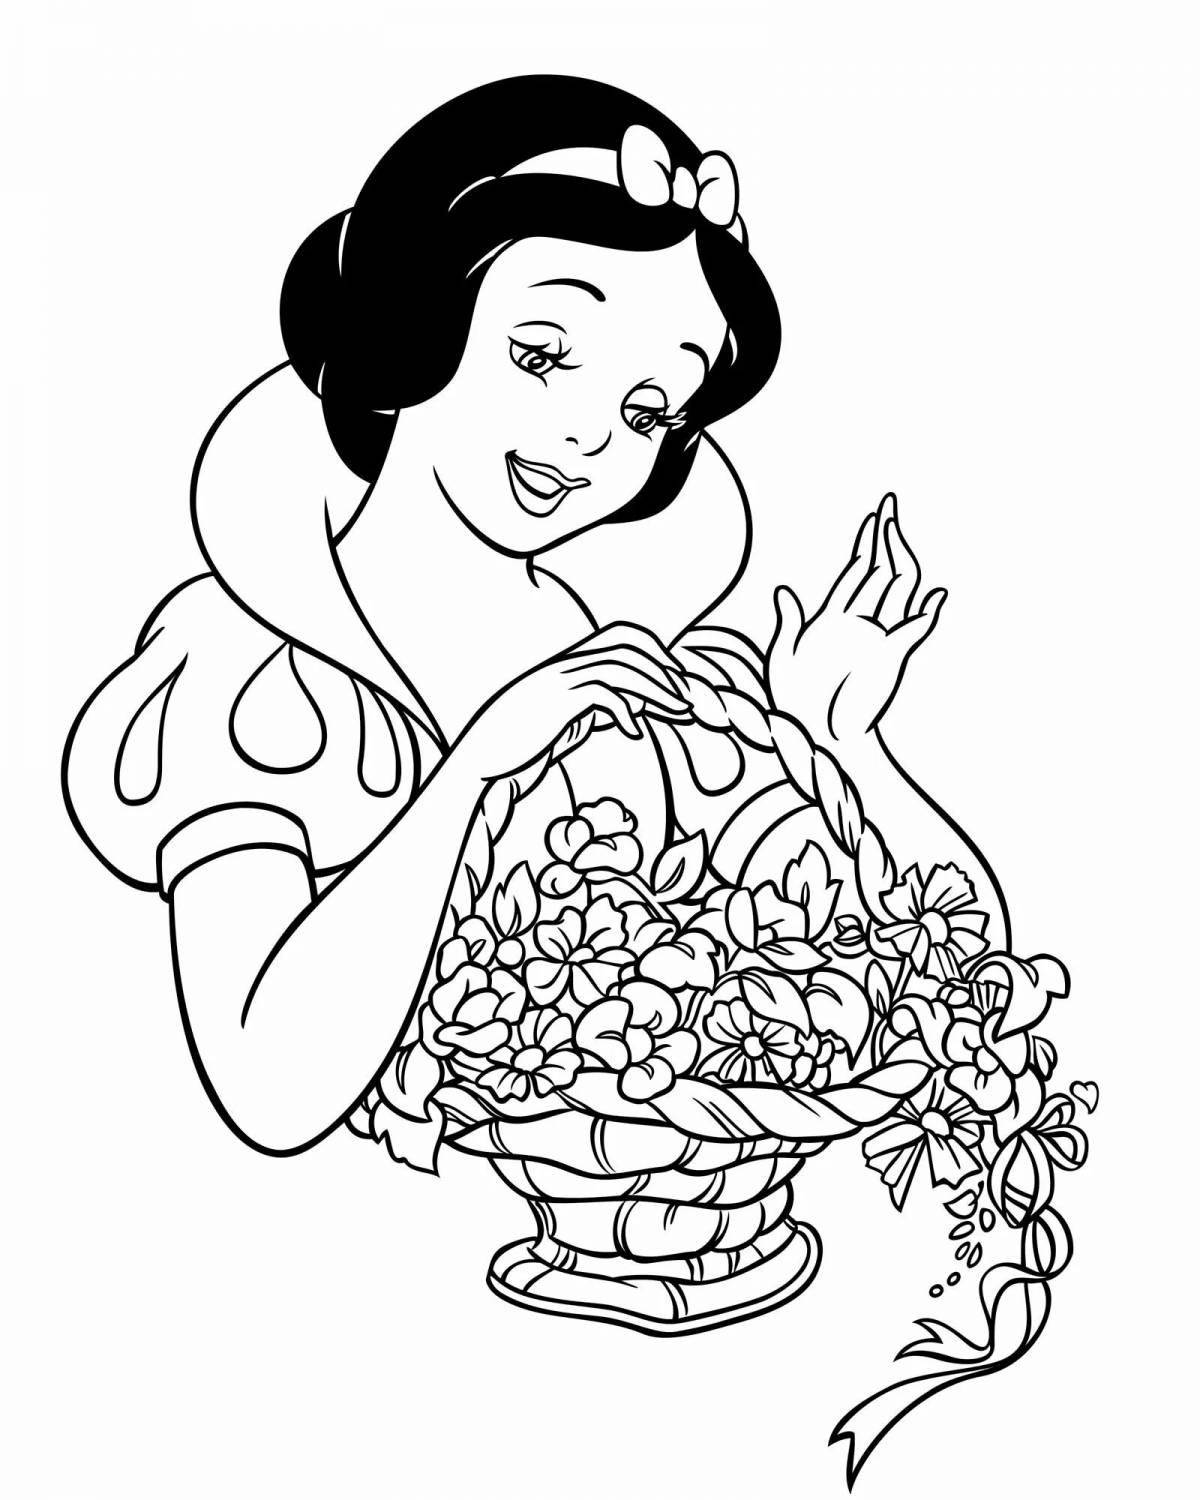 Cute snow white coloring for kids